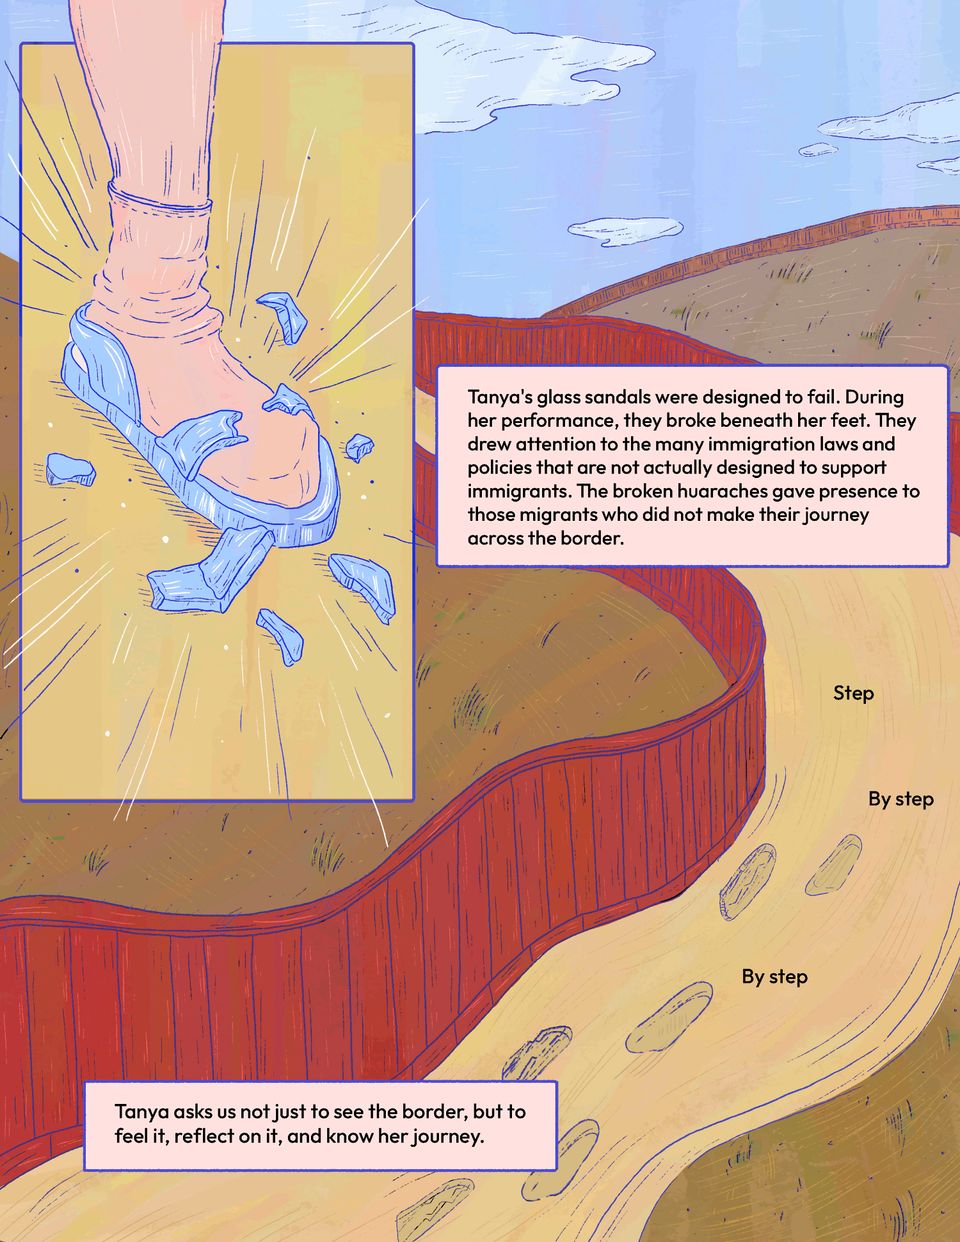 Illustration and description of a border landscape with a vignette of Tanya’s foot smashing the glass huarache she wore as part of her performance.